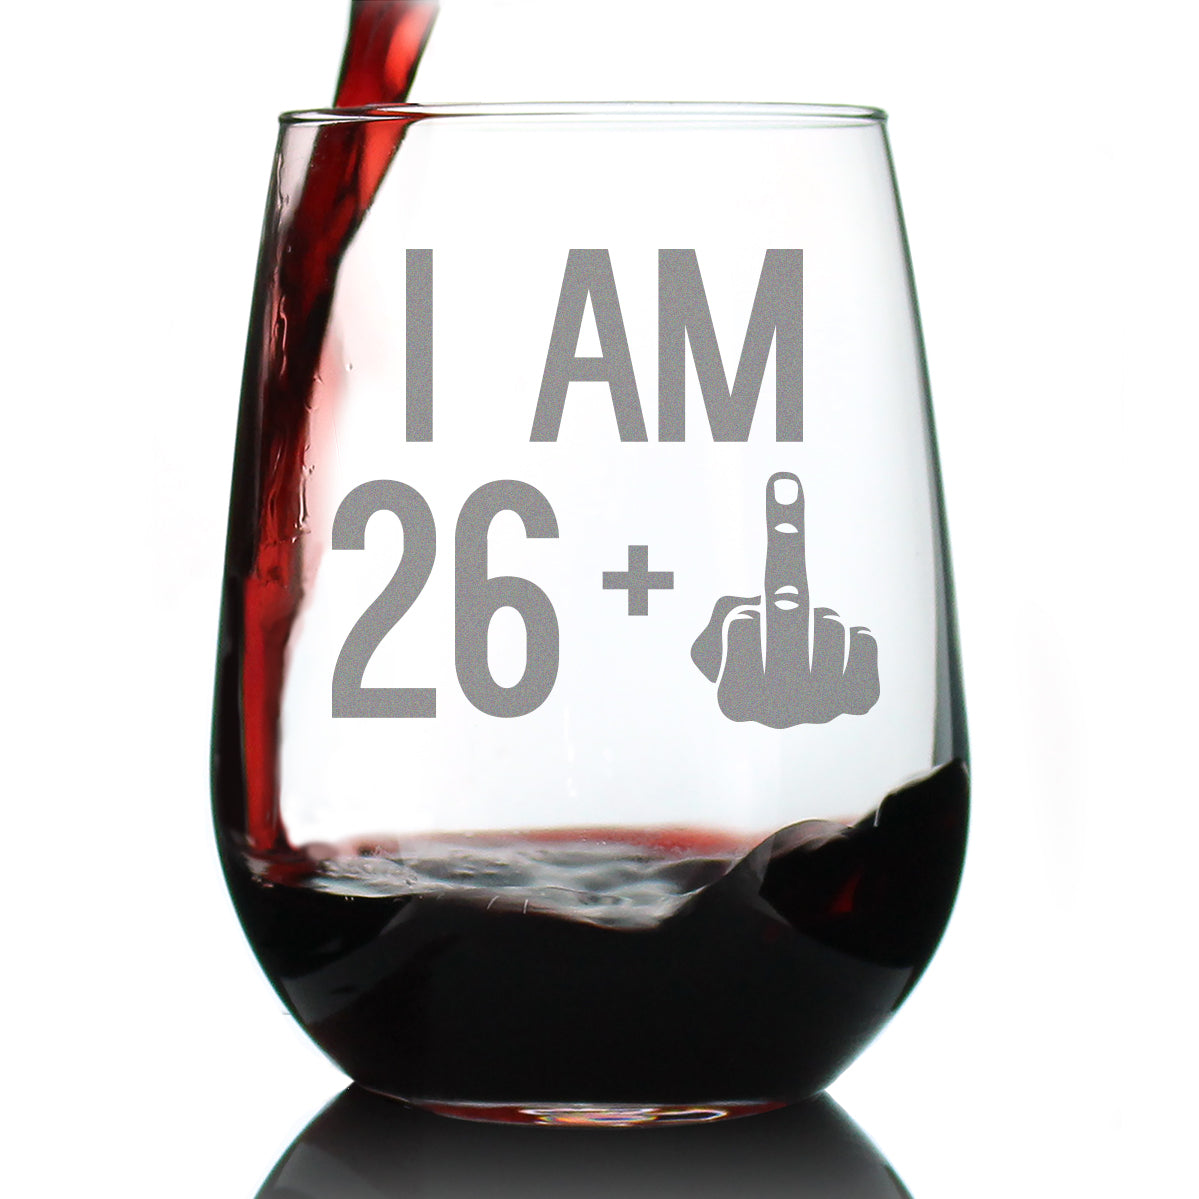 26 + 1 Middle Finger Funny Stemless Wine Glass, Large 17 Ounce Size, Etched Sayings, 27th Birthday Gift for Women Turning 27